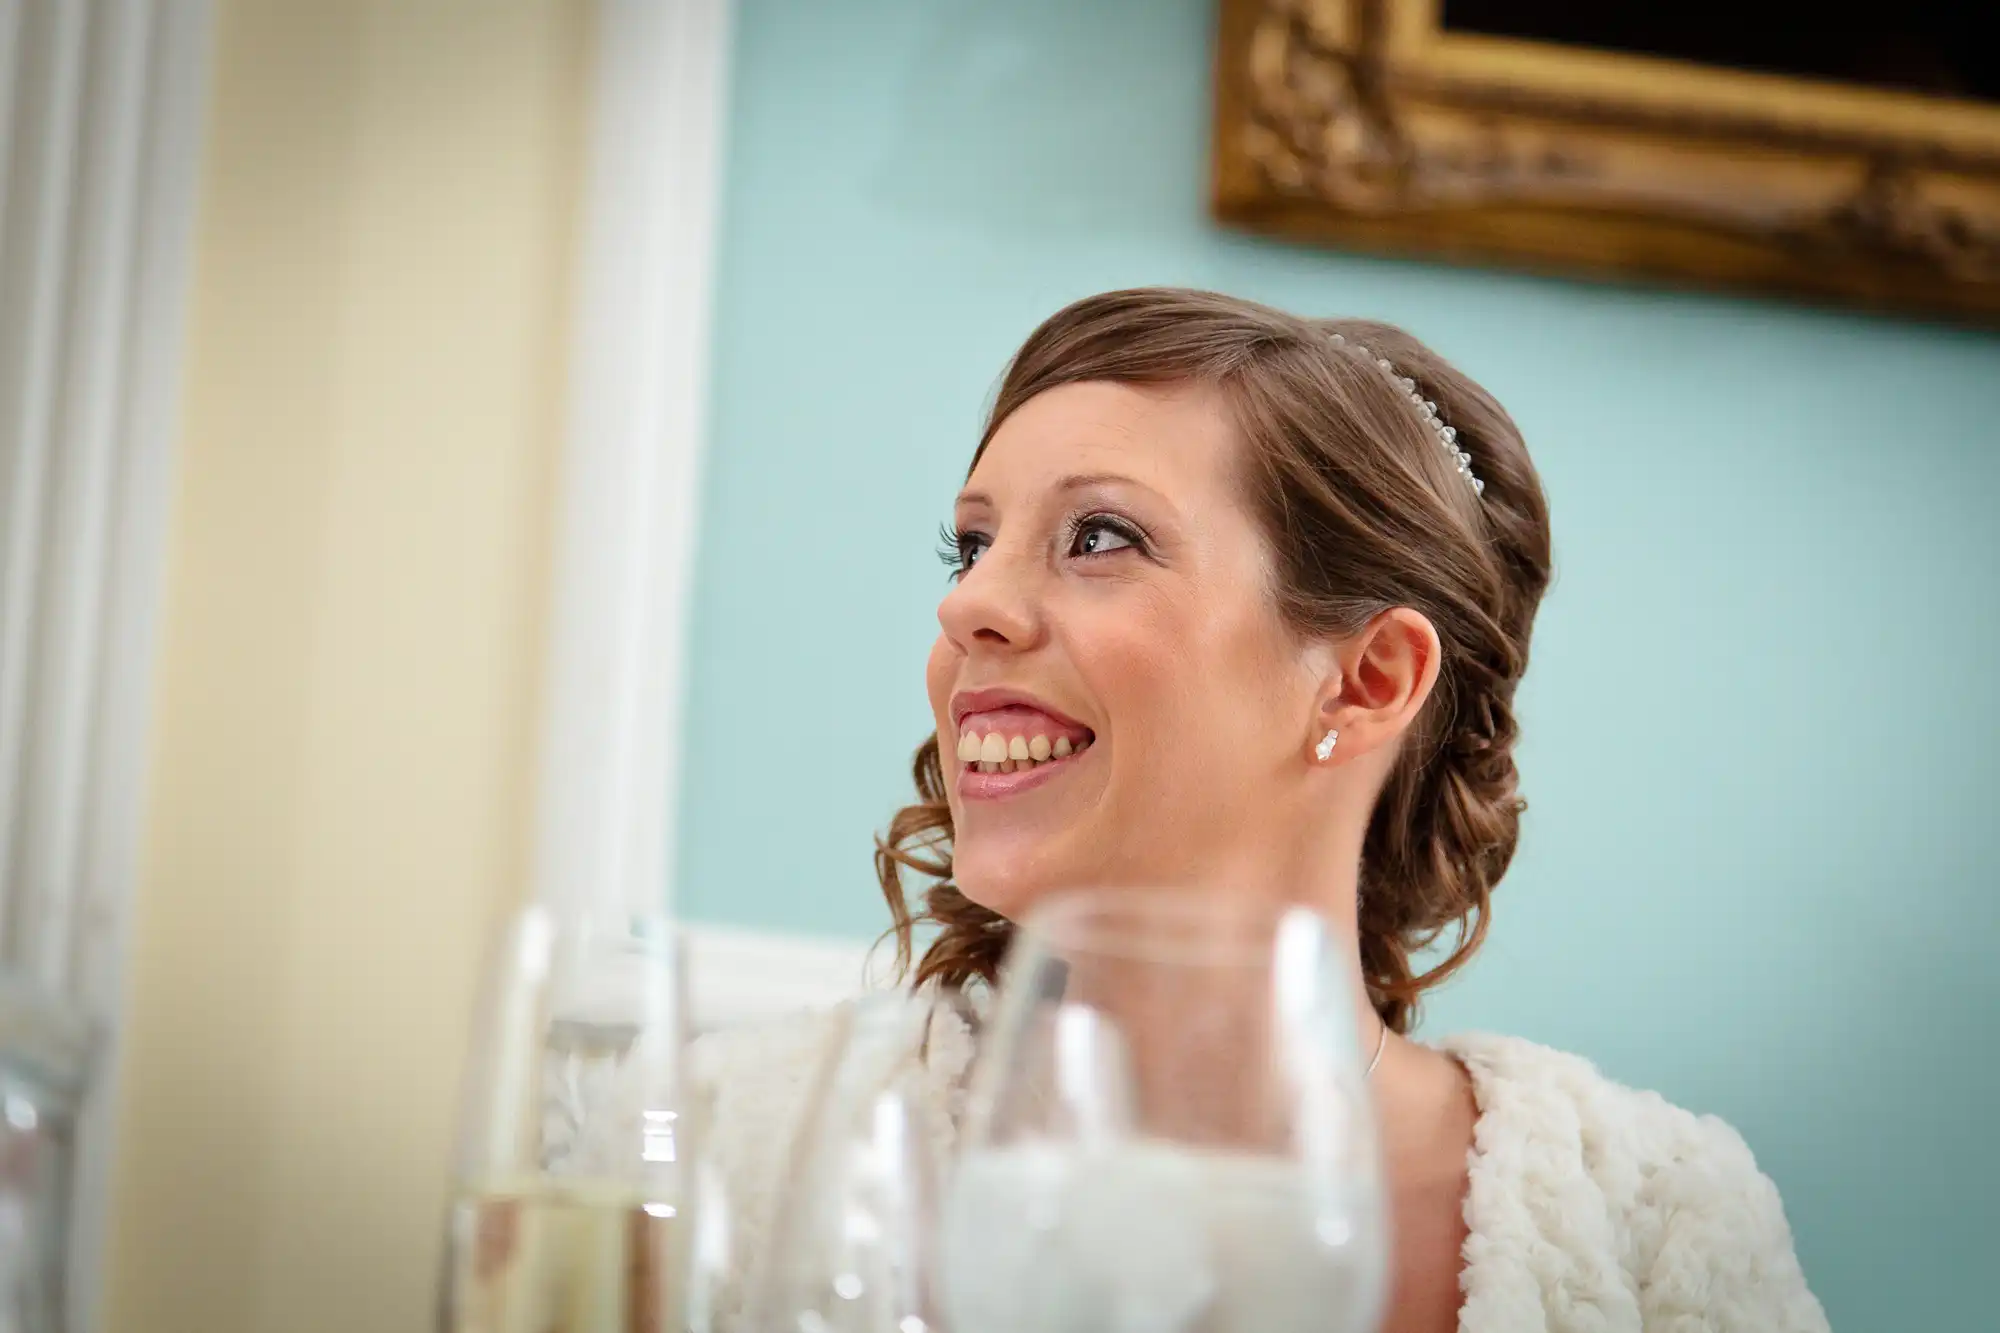 A smiling bride, wearing a tiara and white dress, looks away thoughtfully in a room with light blue walls and elegant decor.